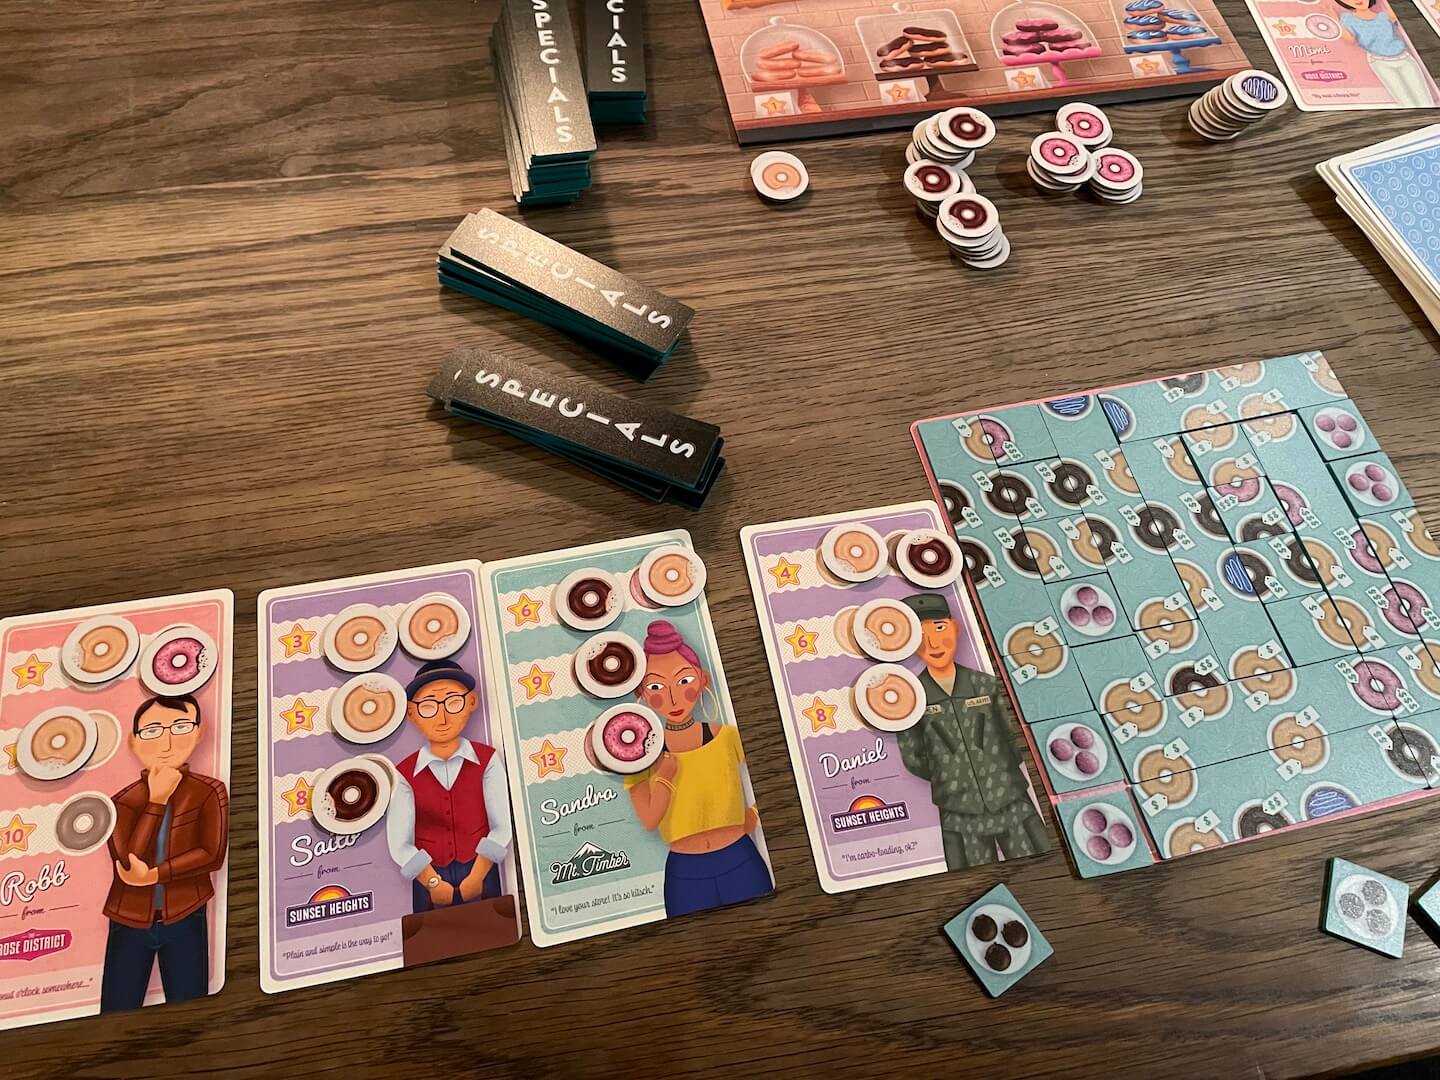 A full and complete player board in Dollars To Donuts, which ends the game